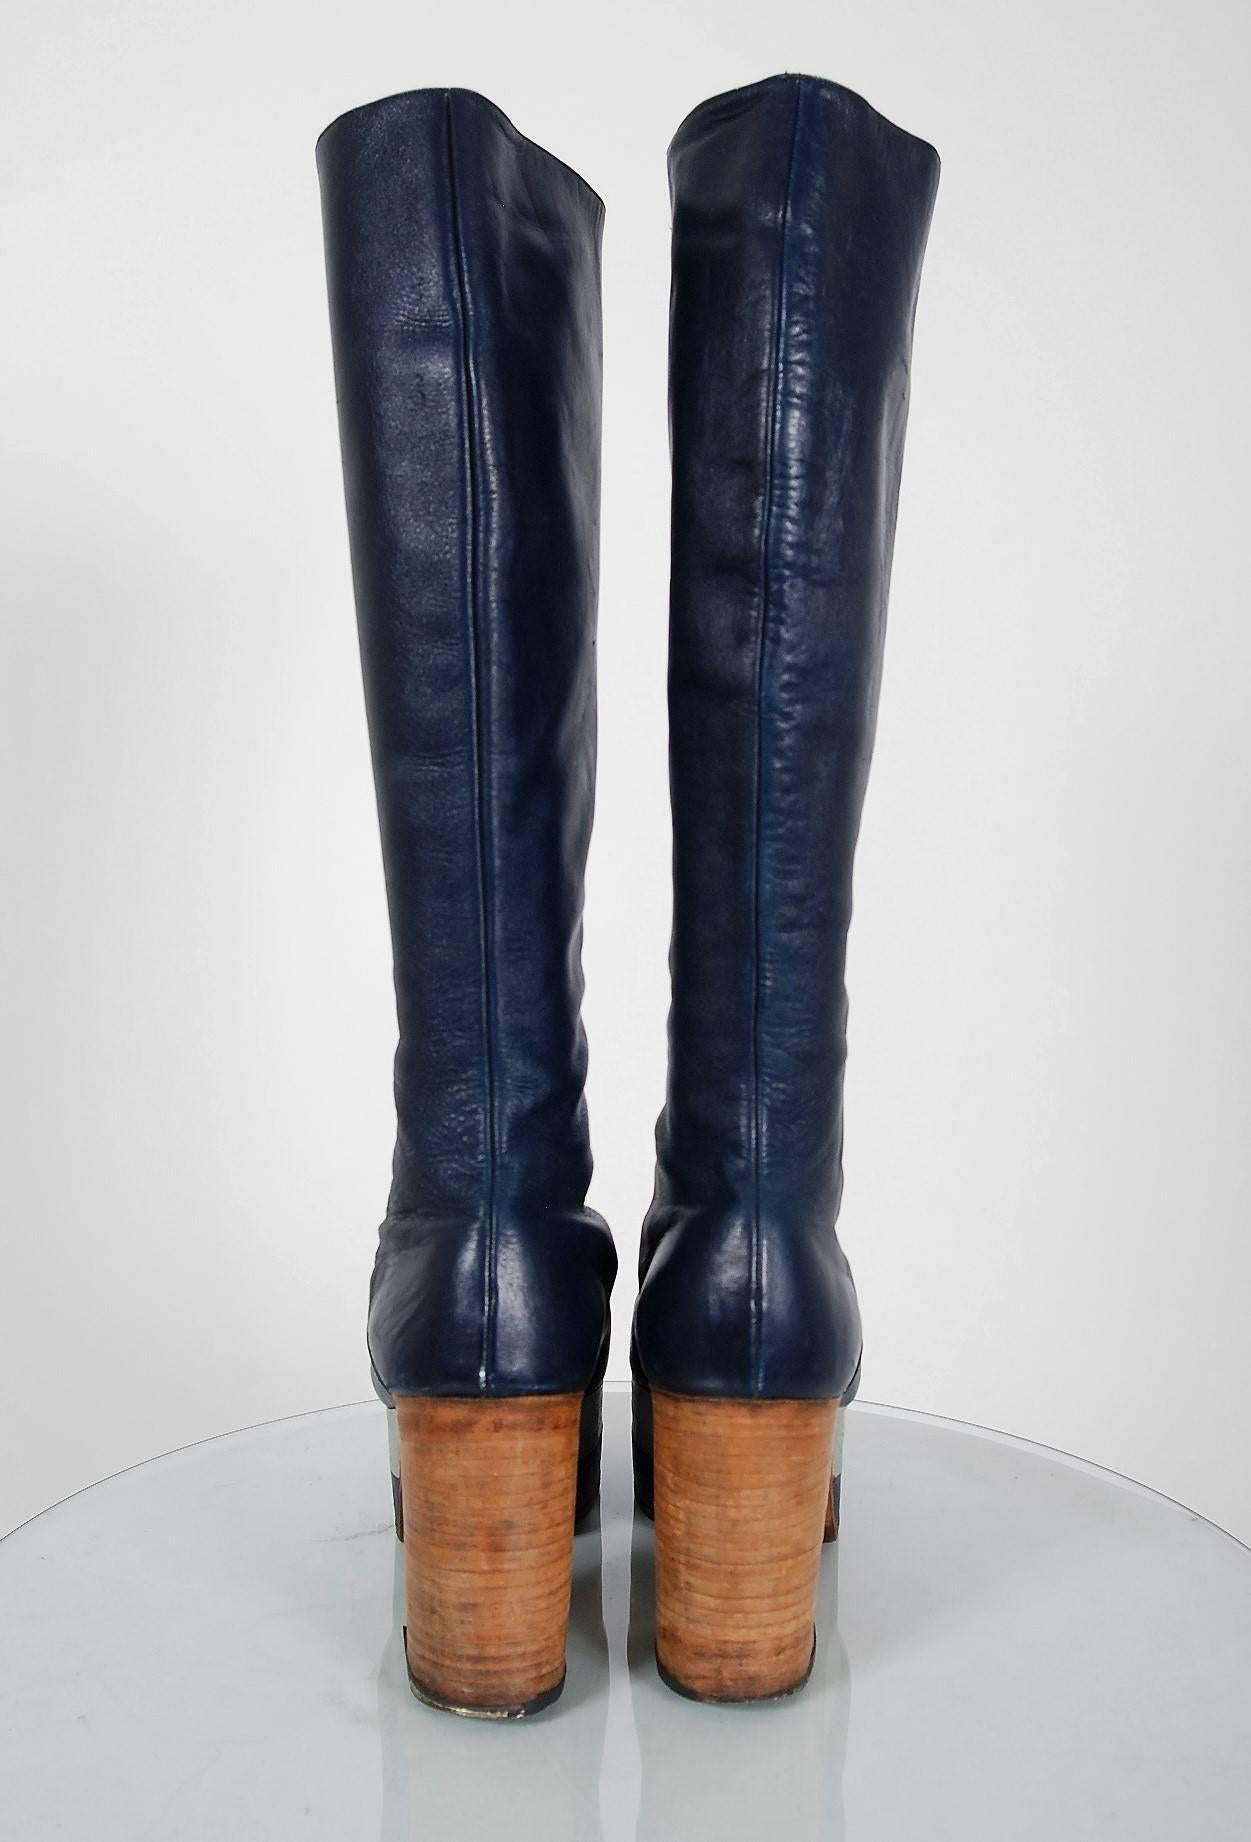 1970's Blue & Silver Leather Novelty Hearts Knee-High Platform Glam-Rock Boots 1